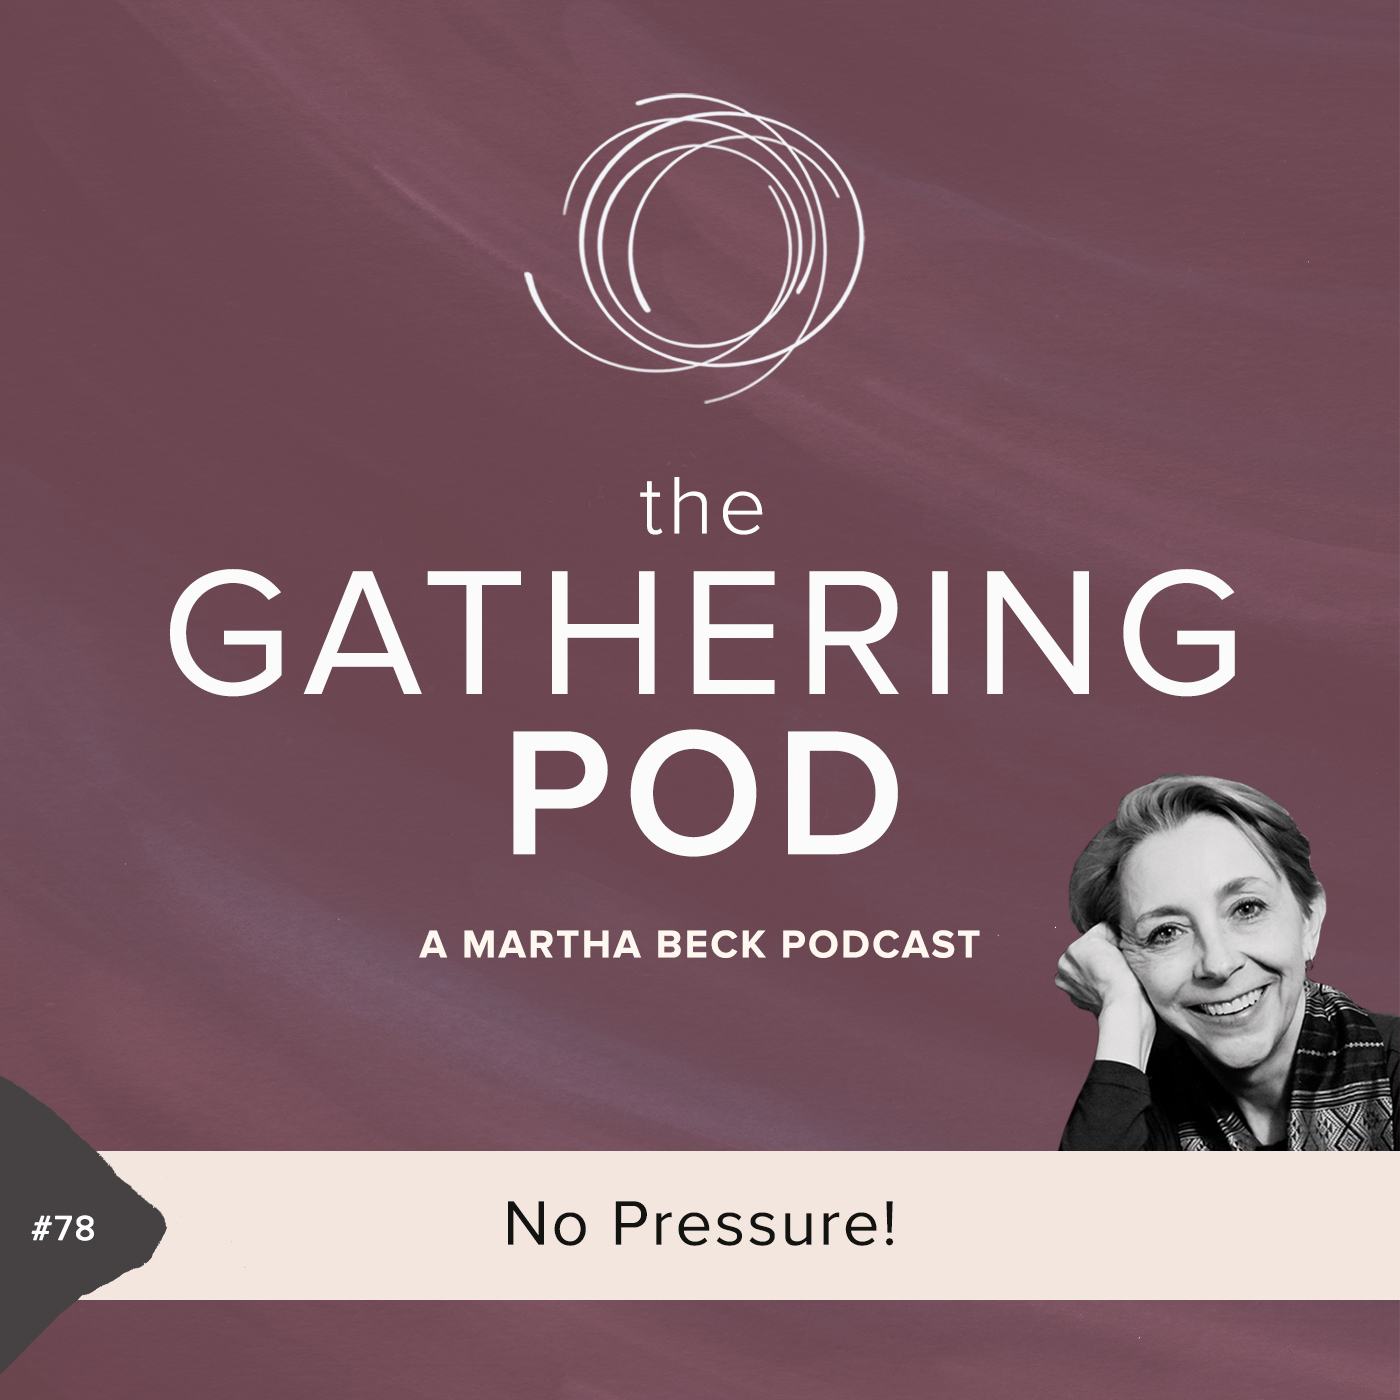 Image for The Gathering Pod A Martha Beck Podcast Episode #78 No Pressure